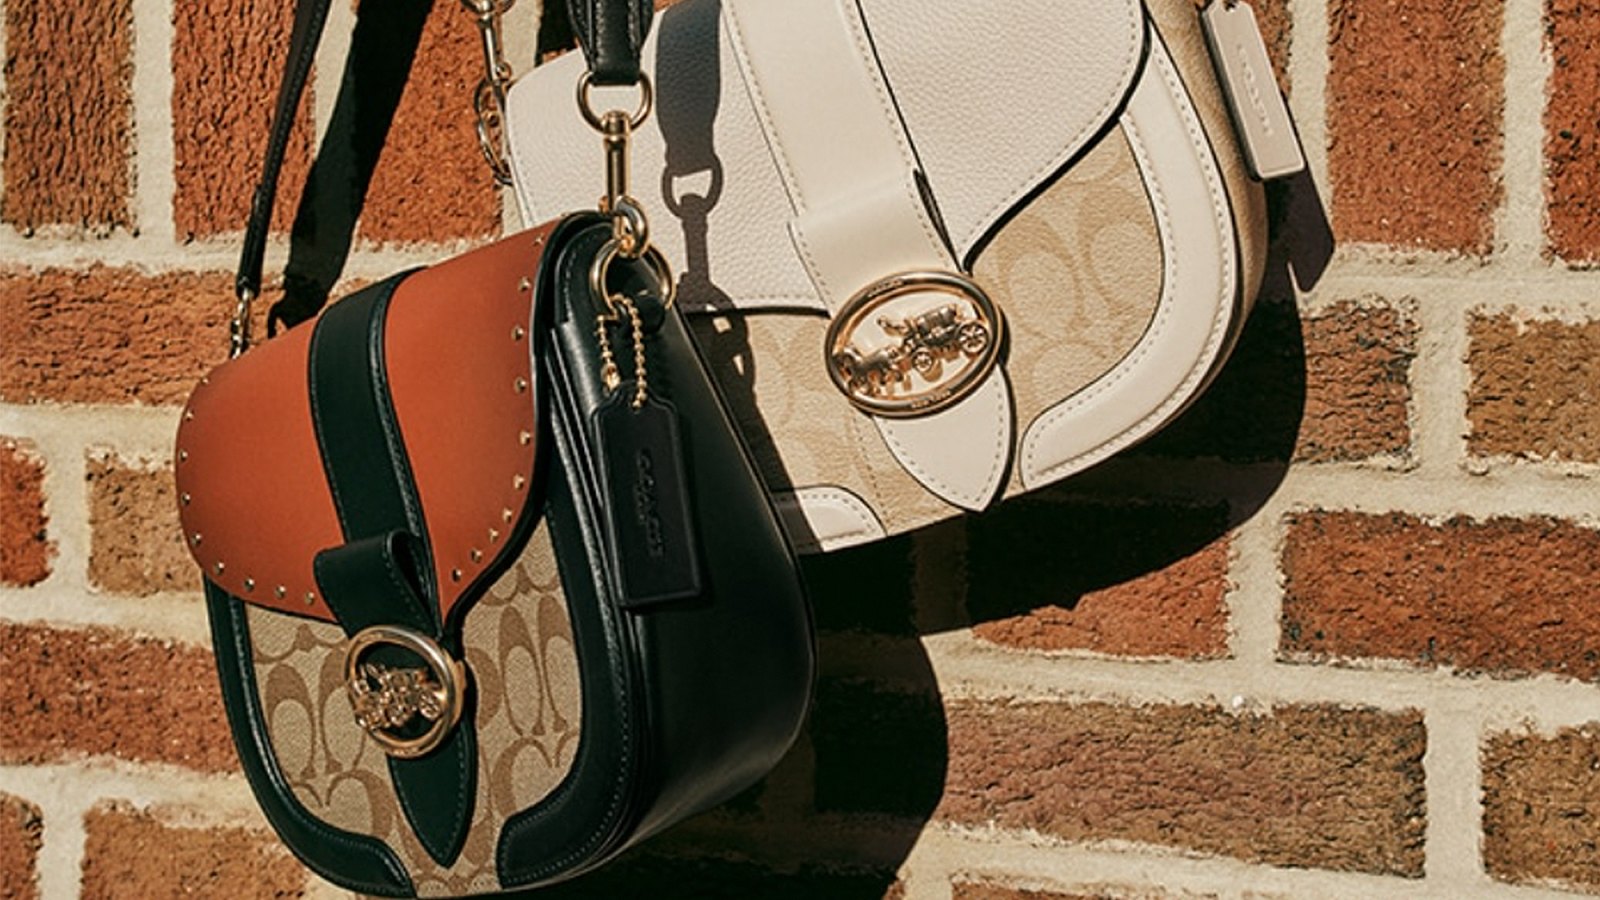 Shop Coach Outlet's Bestselling $250 Crossbody Bag for Just $79